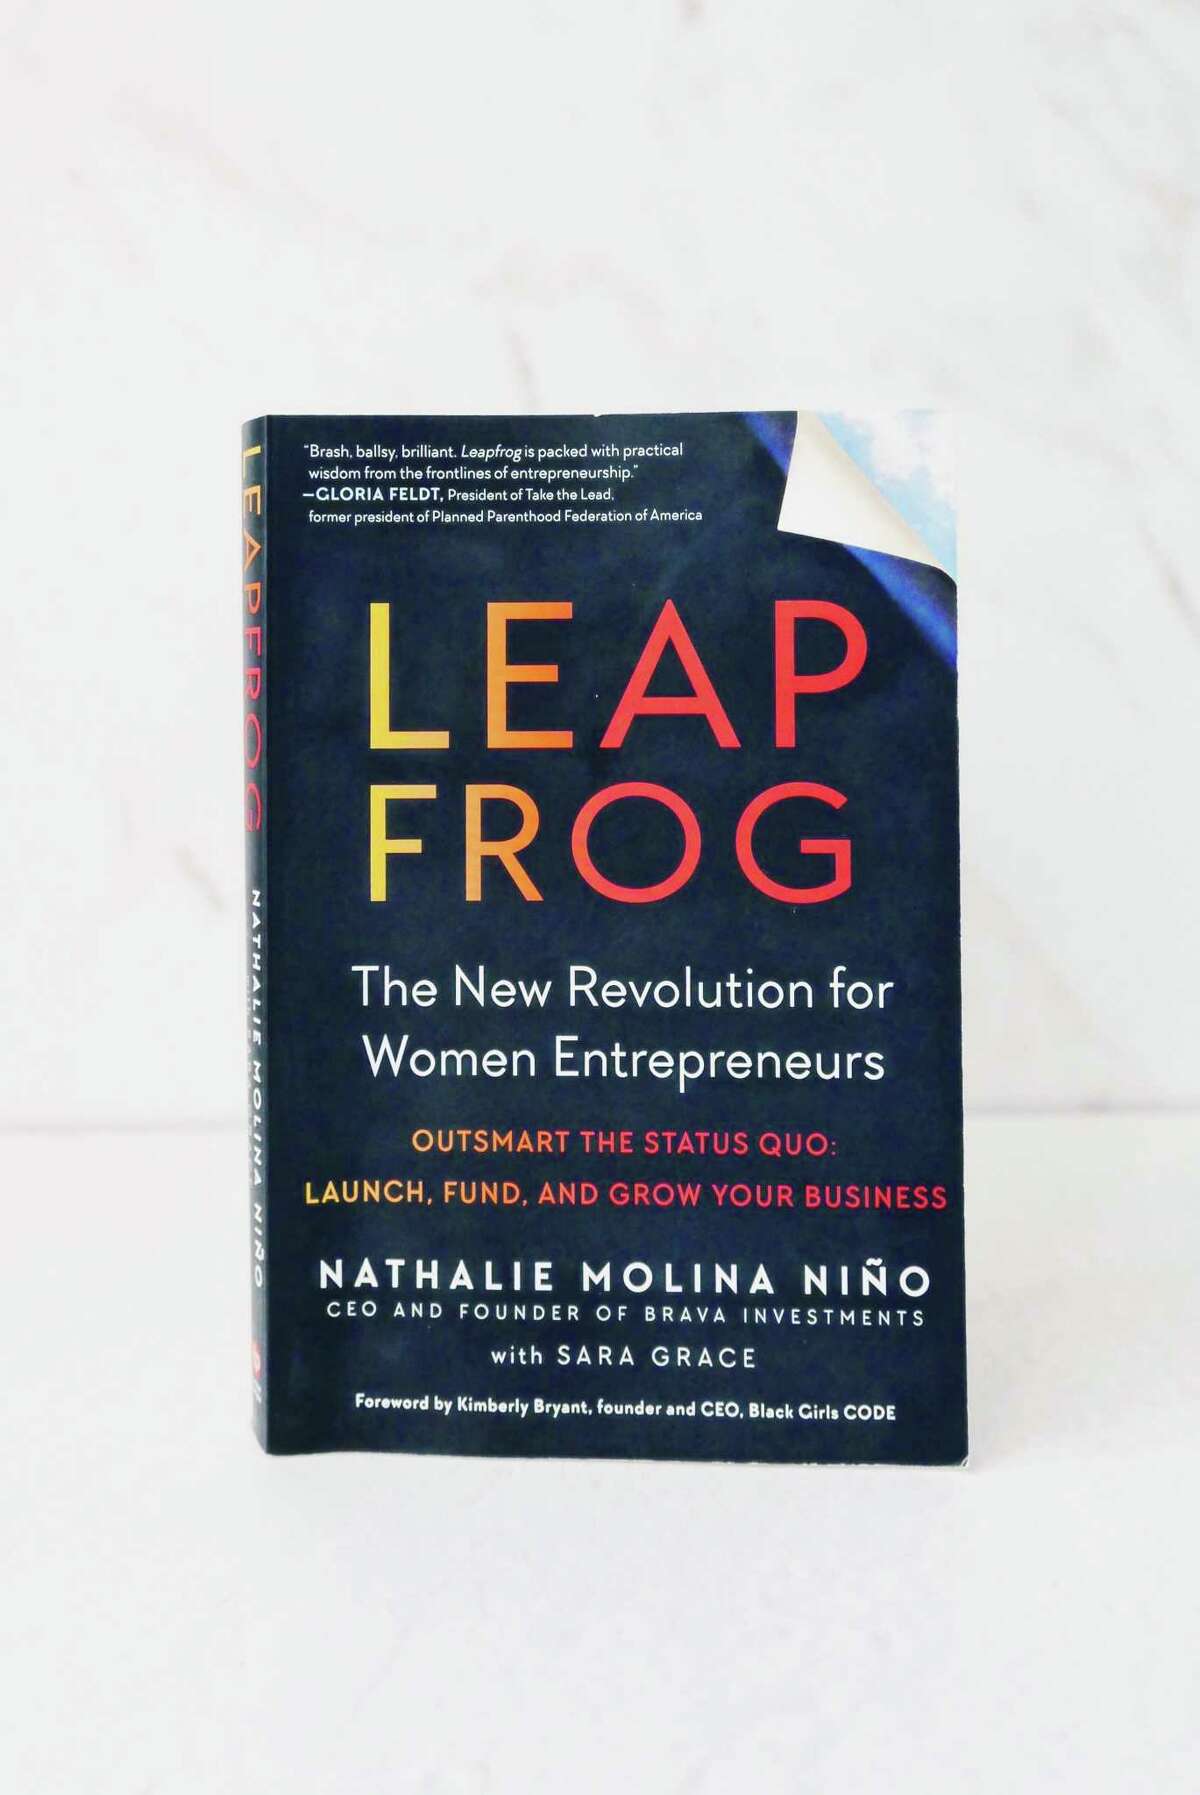 LUXE READING: Elaine Turner's pick is "Leap Frog" by Nathalie Molina Nino